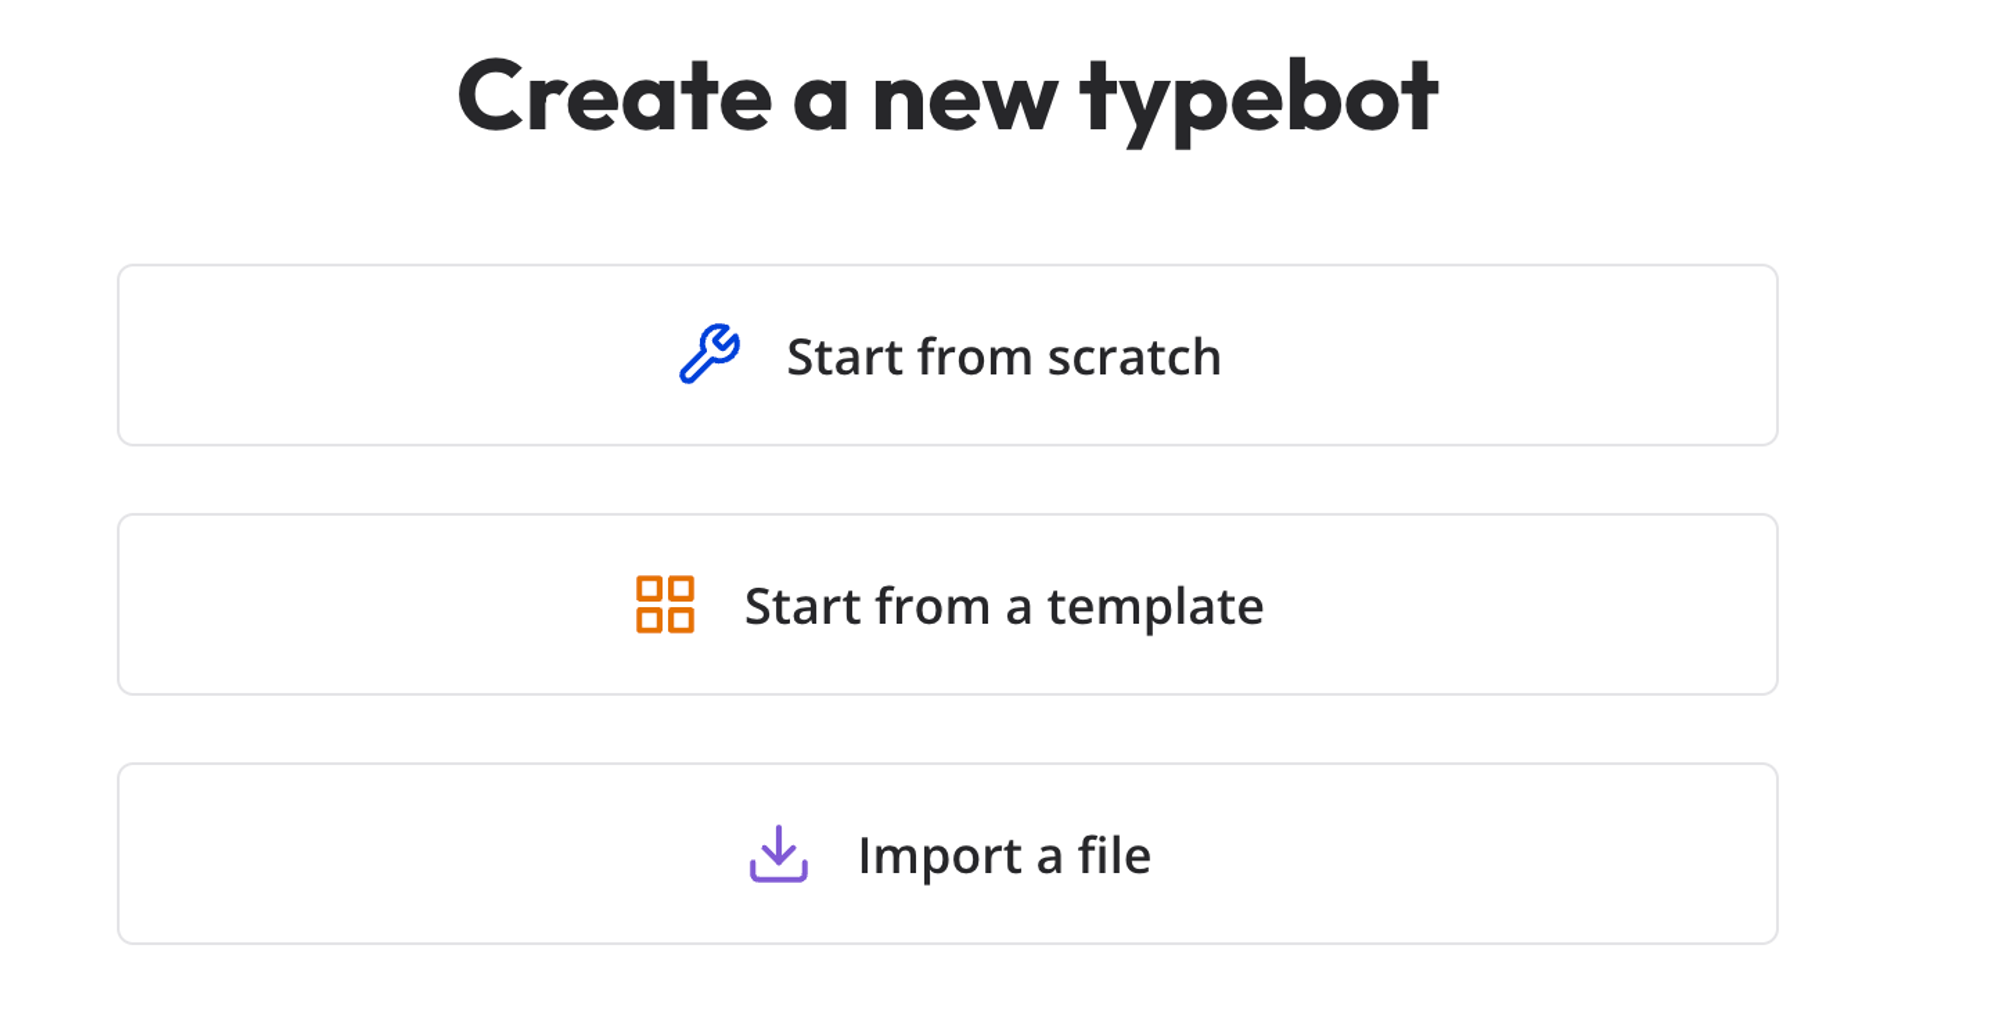 How to create a new Typebot